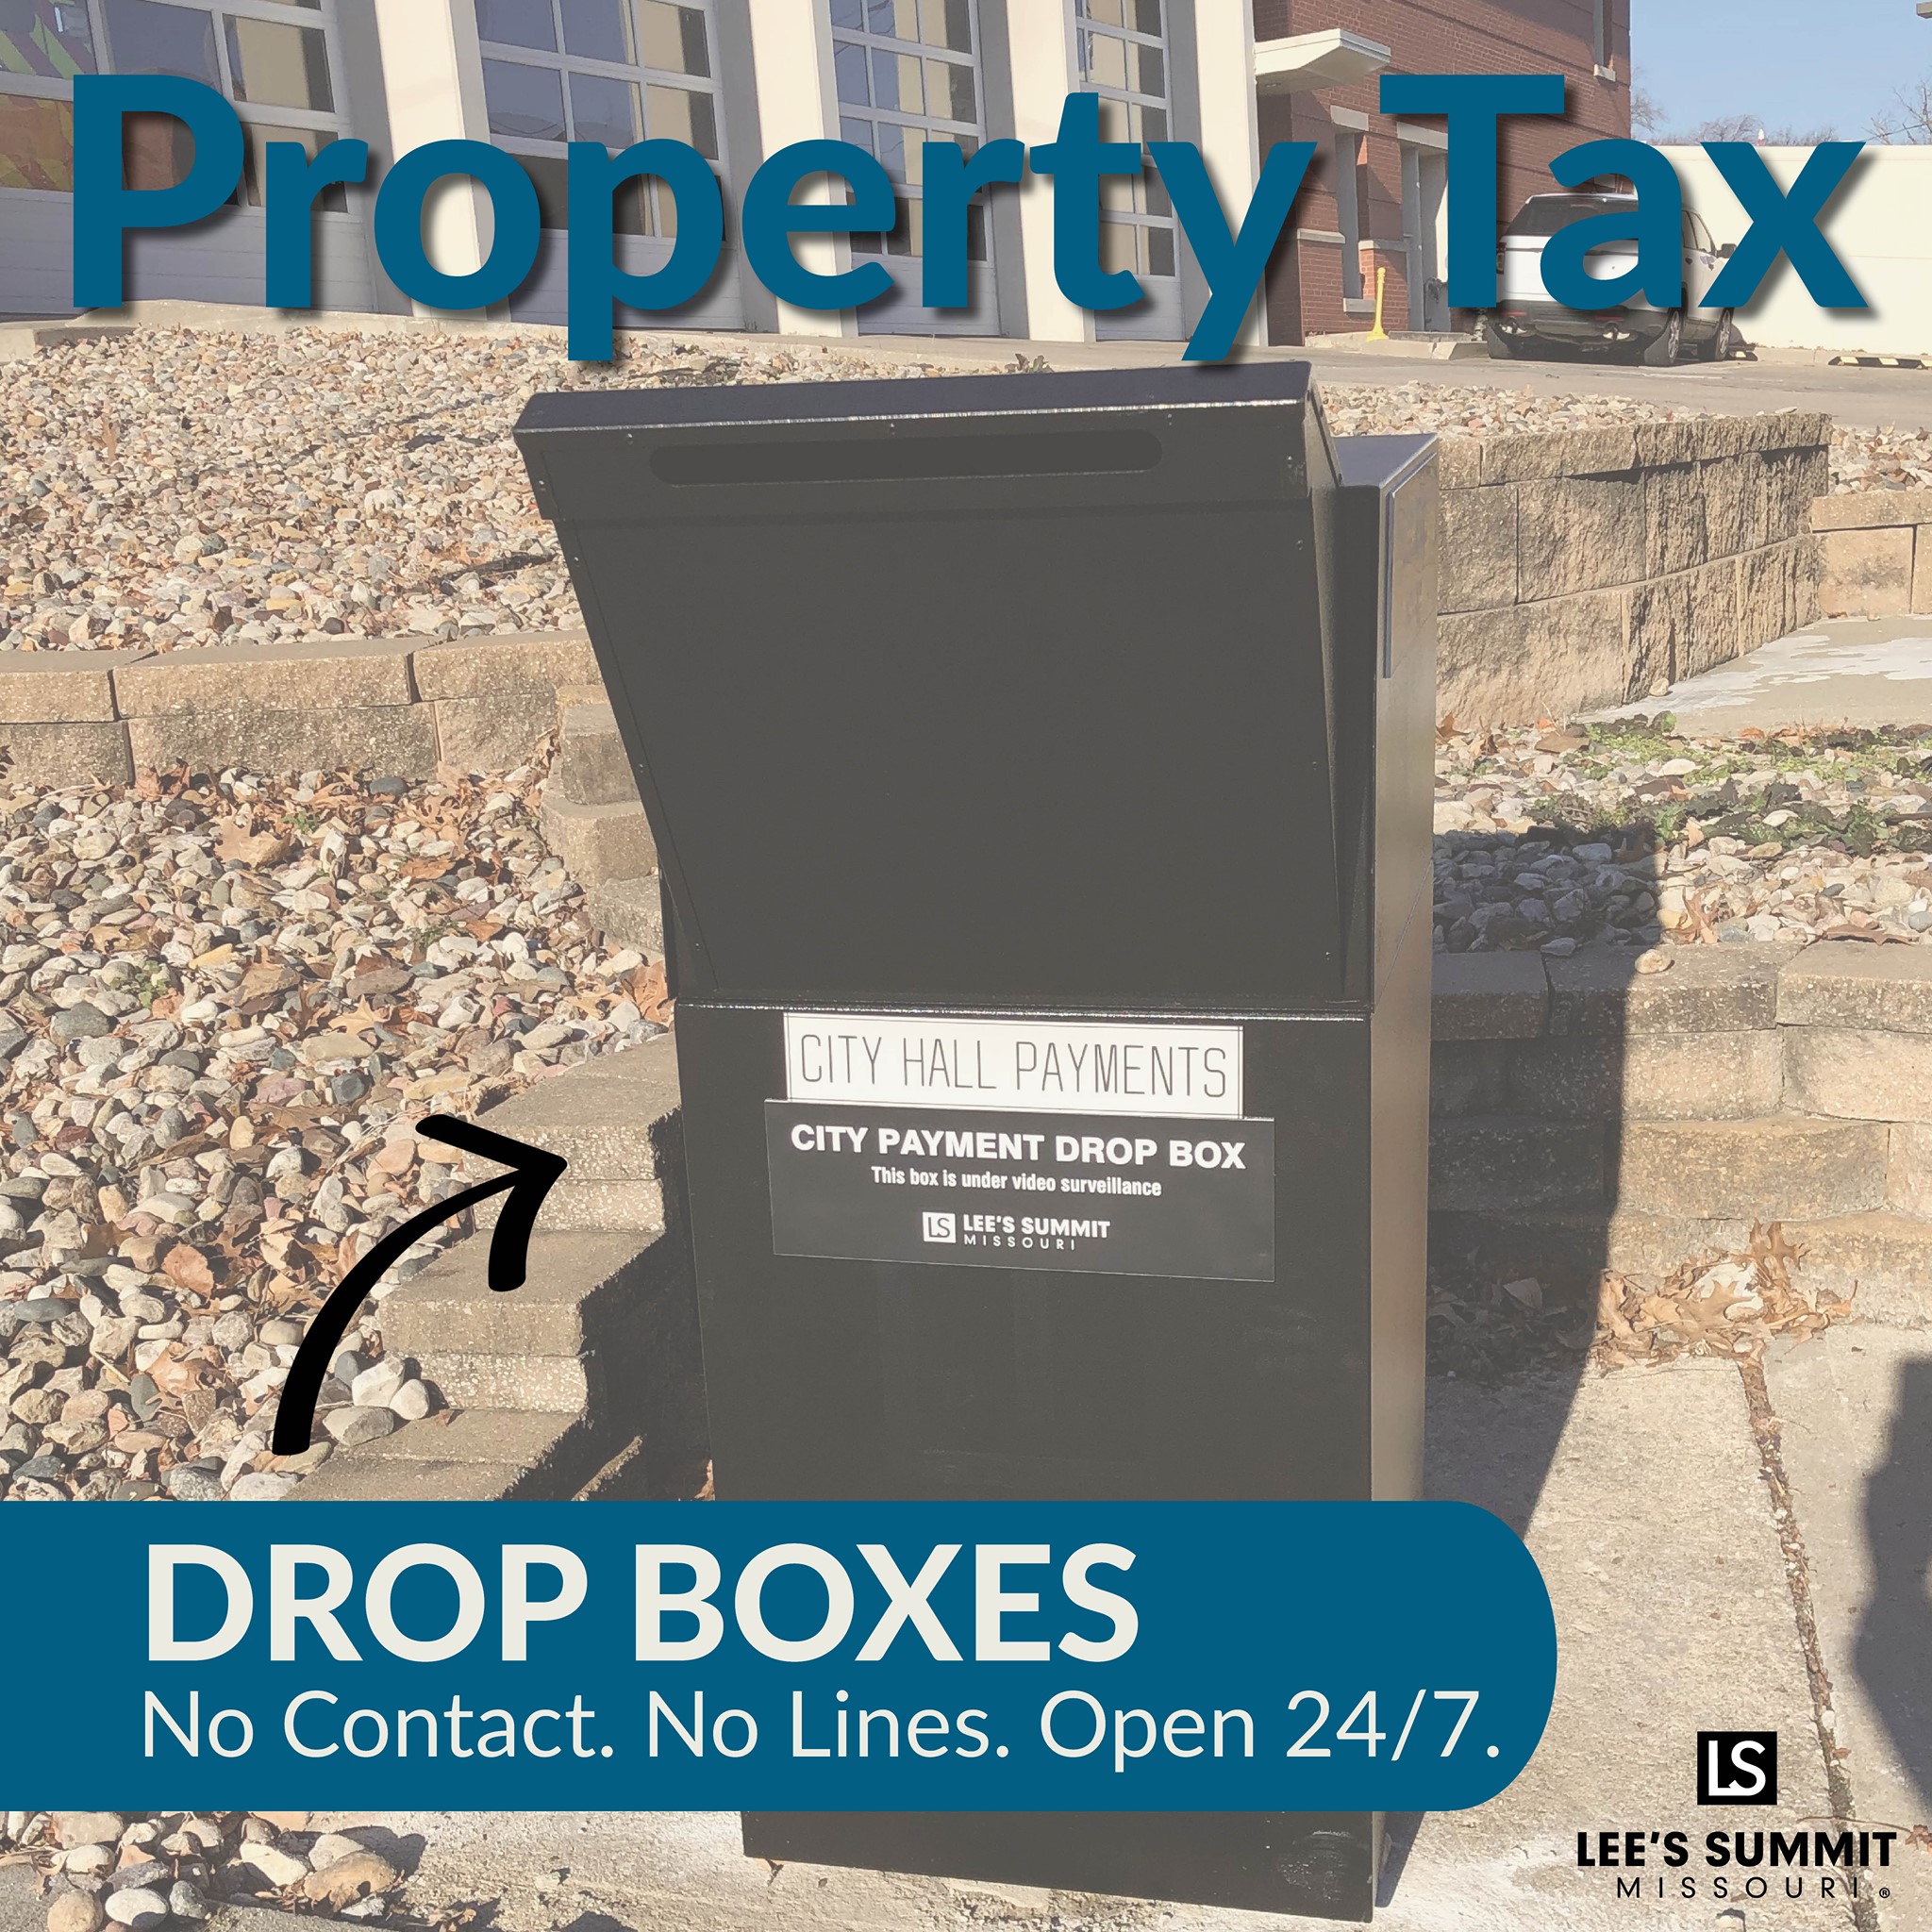 Drop box located in the alley behind City Hall